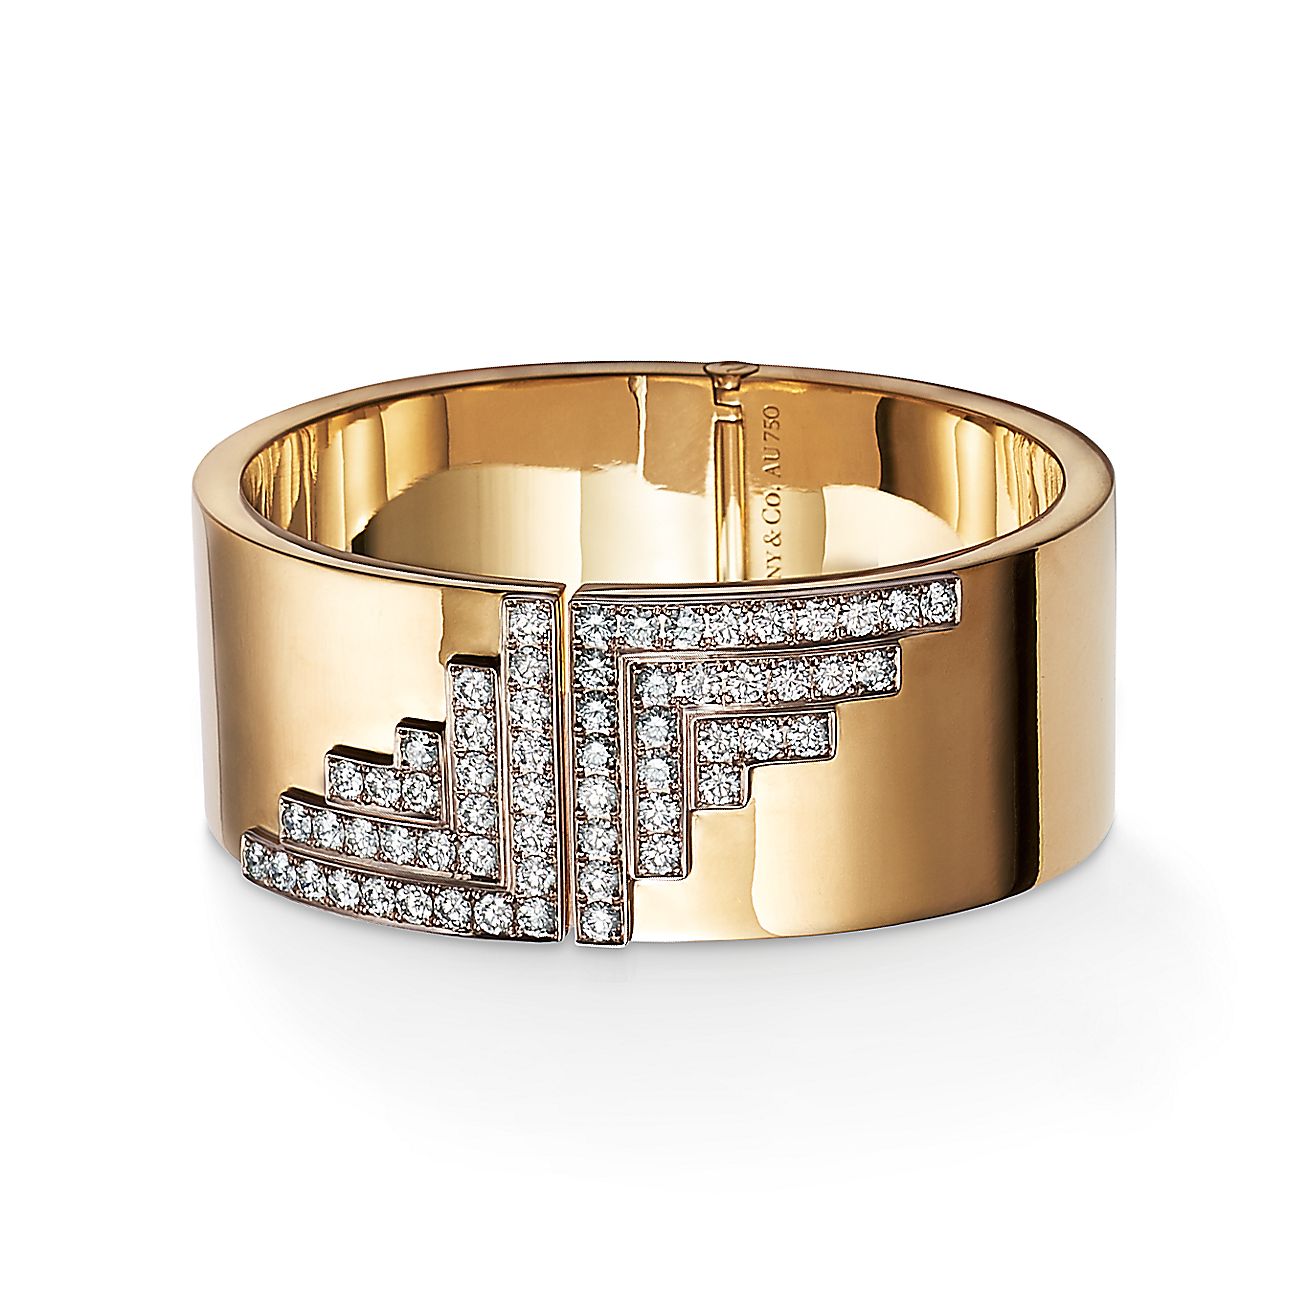 Out of Retirement™ hinged diamond bracelet in 18k gold with diamonds ...